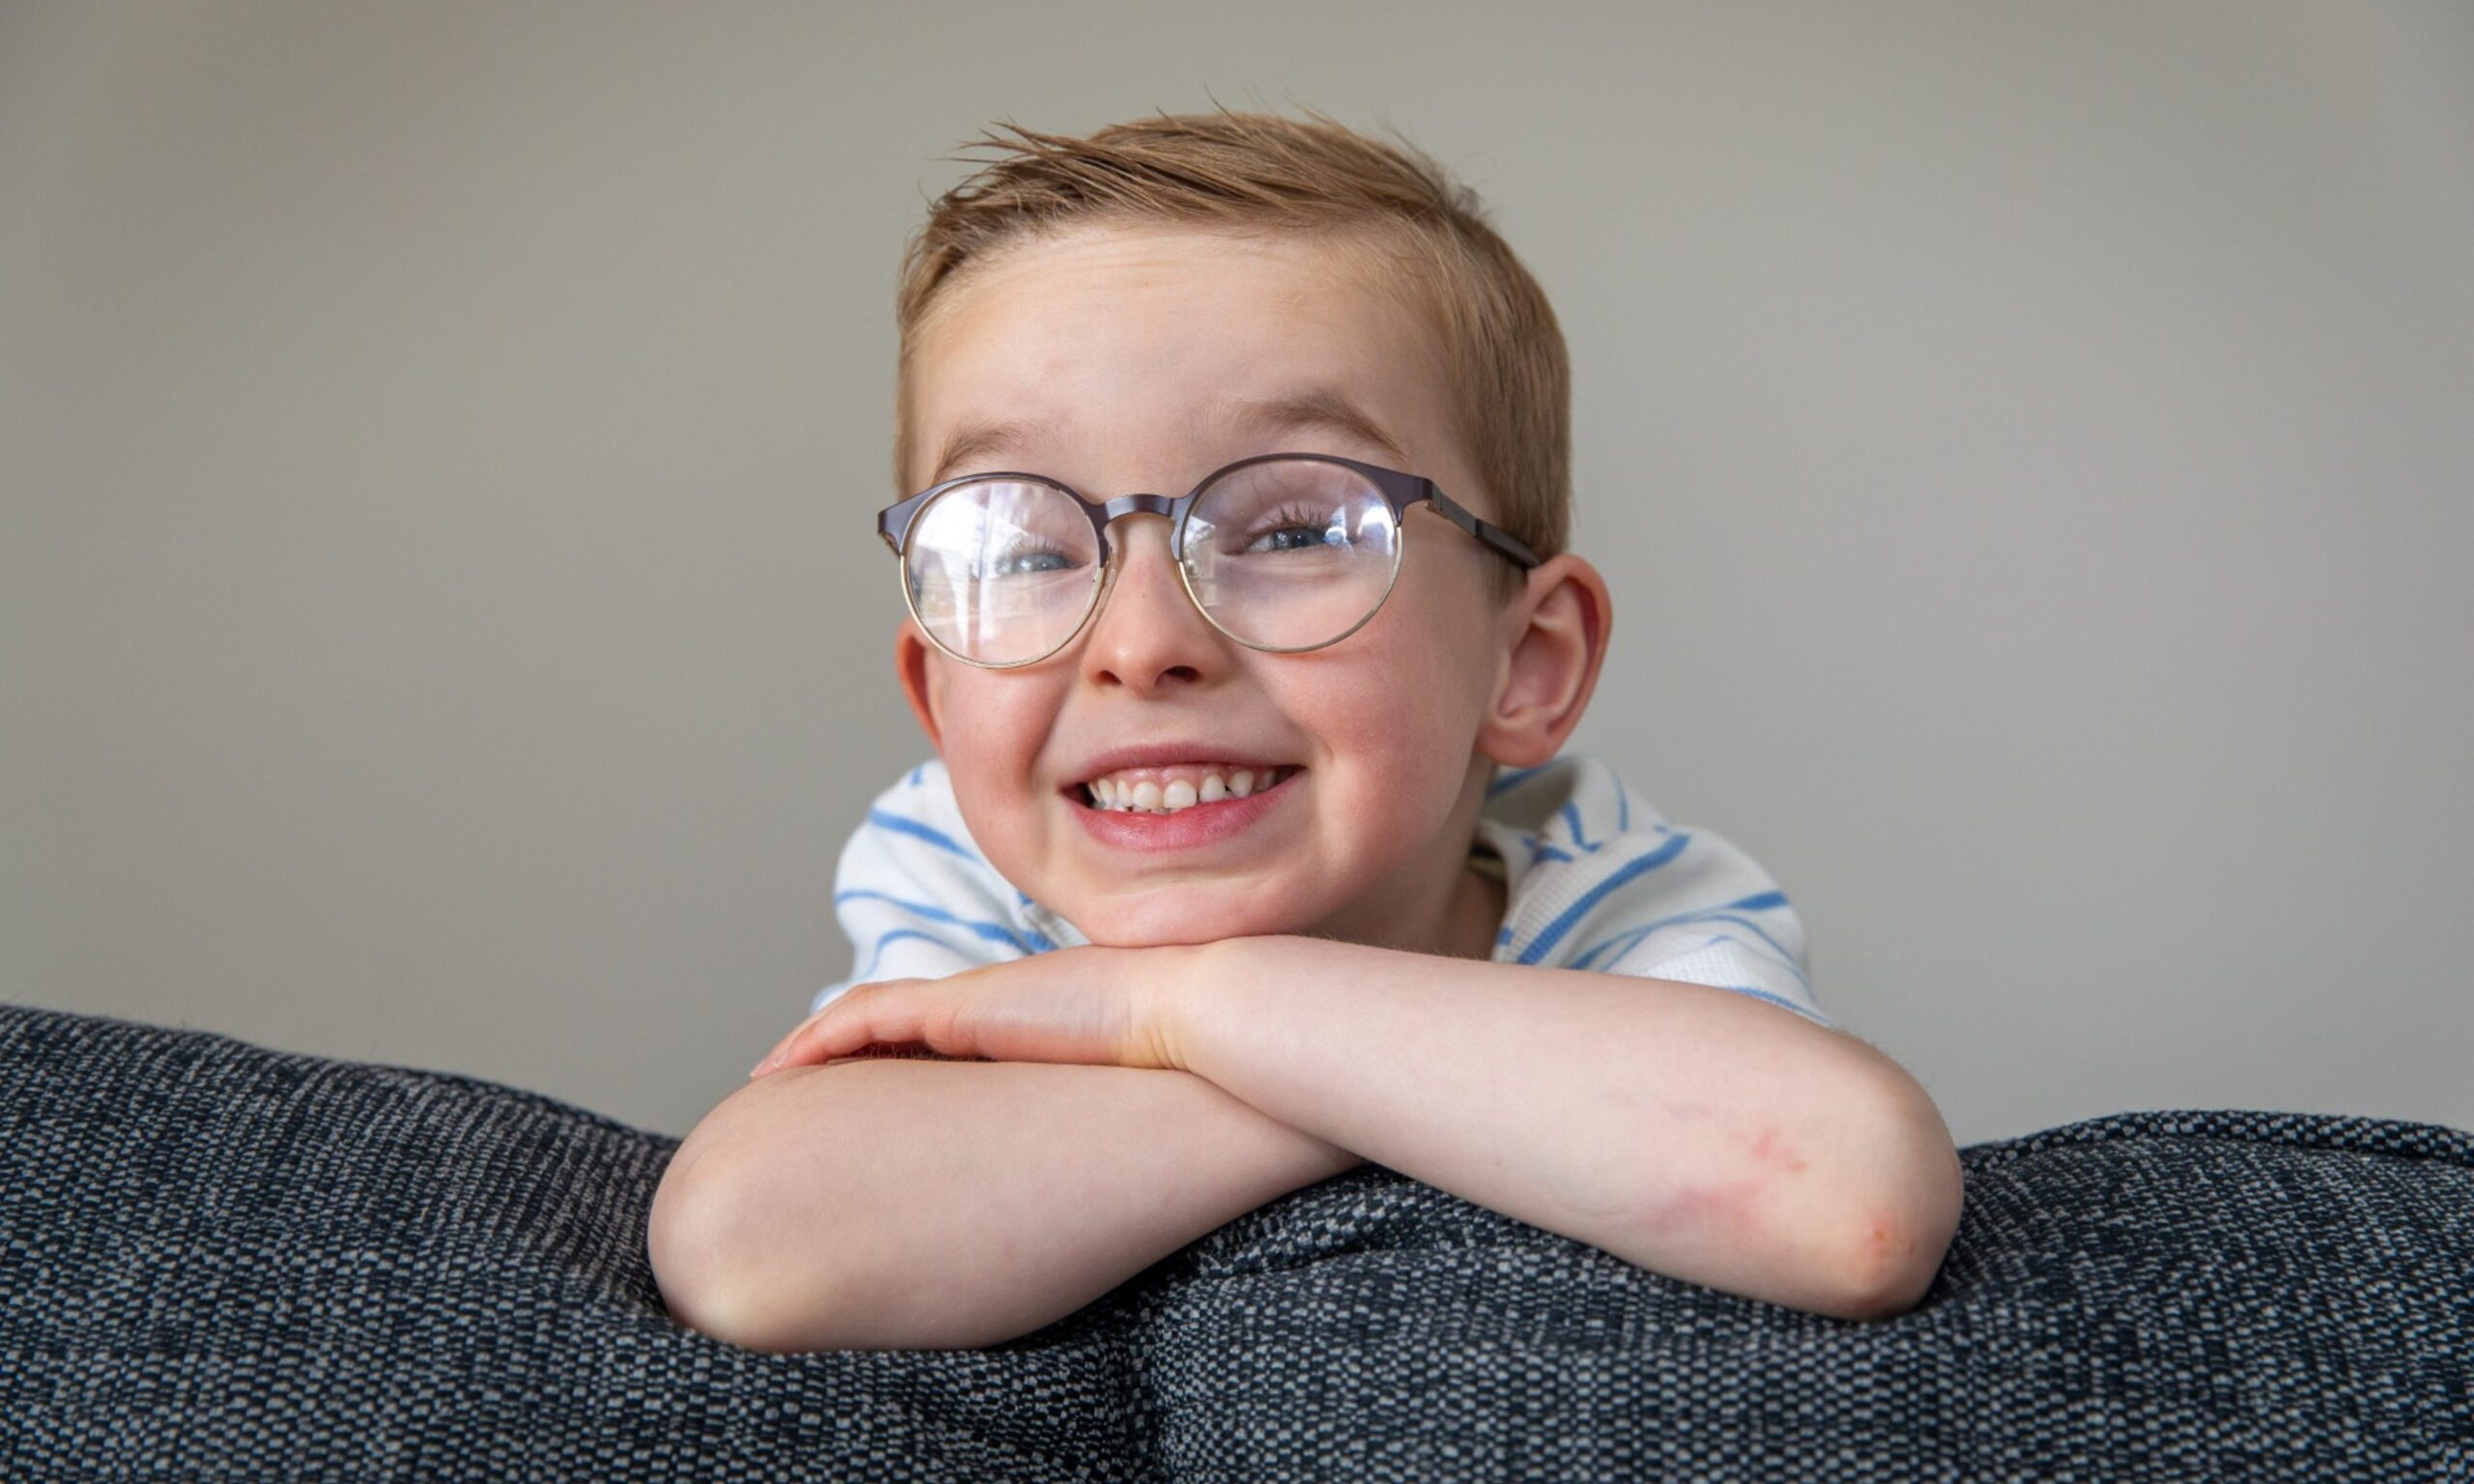 Thomas Sim is full of smiles despite the operations and casts he has had since he was a baby. Image: Steve Brown/DC Thomson.